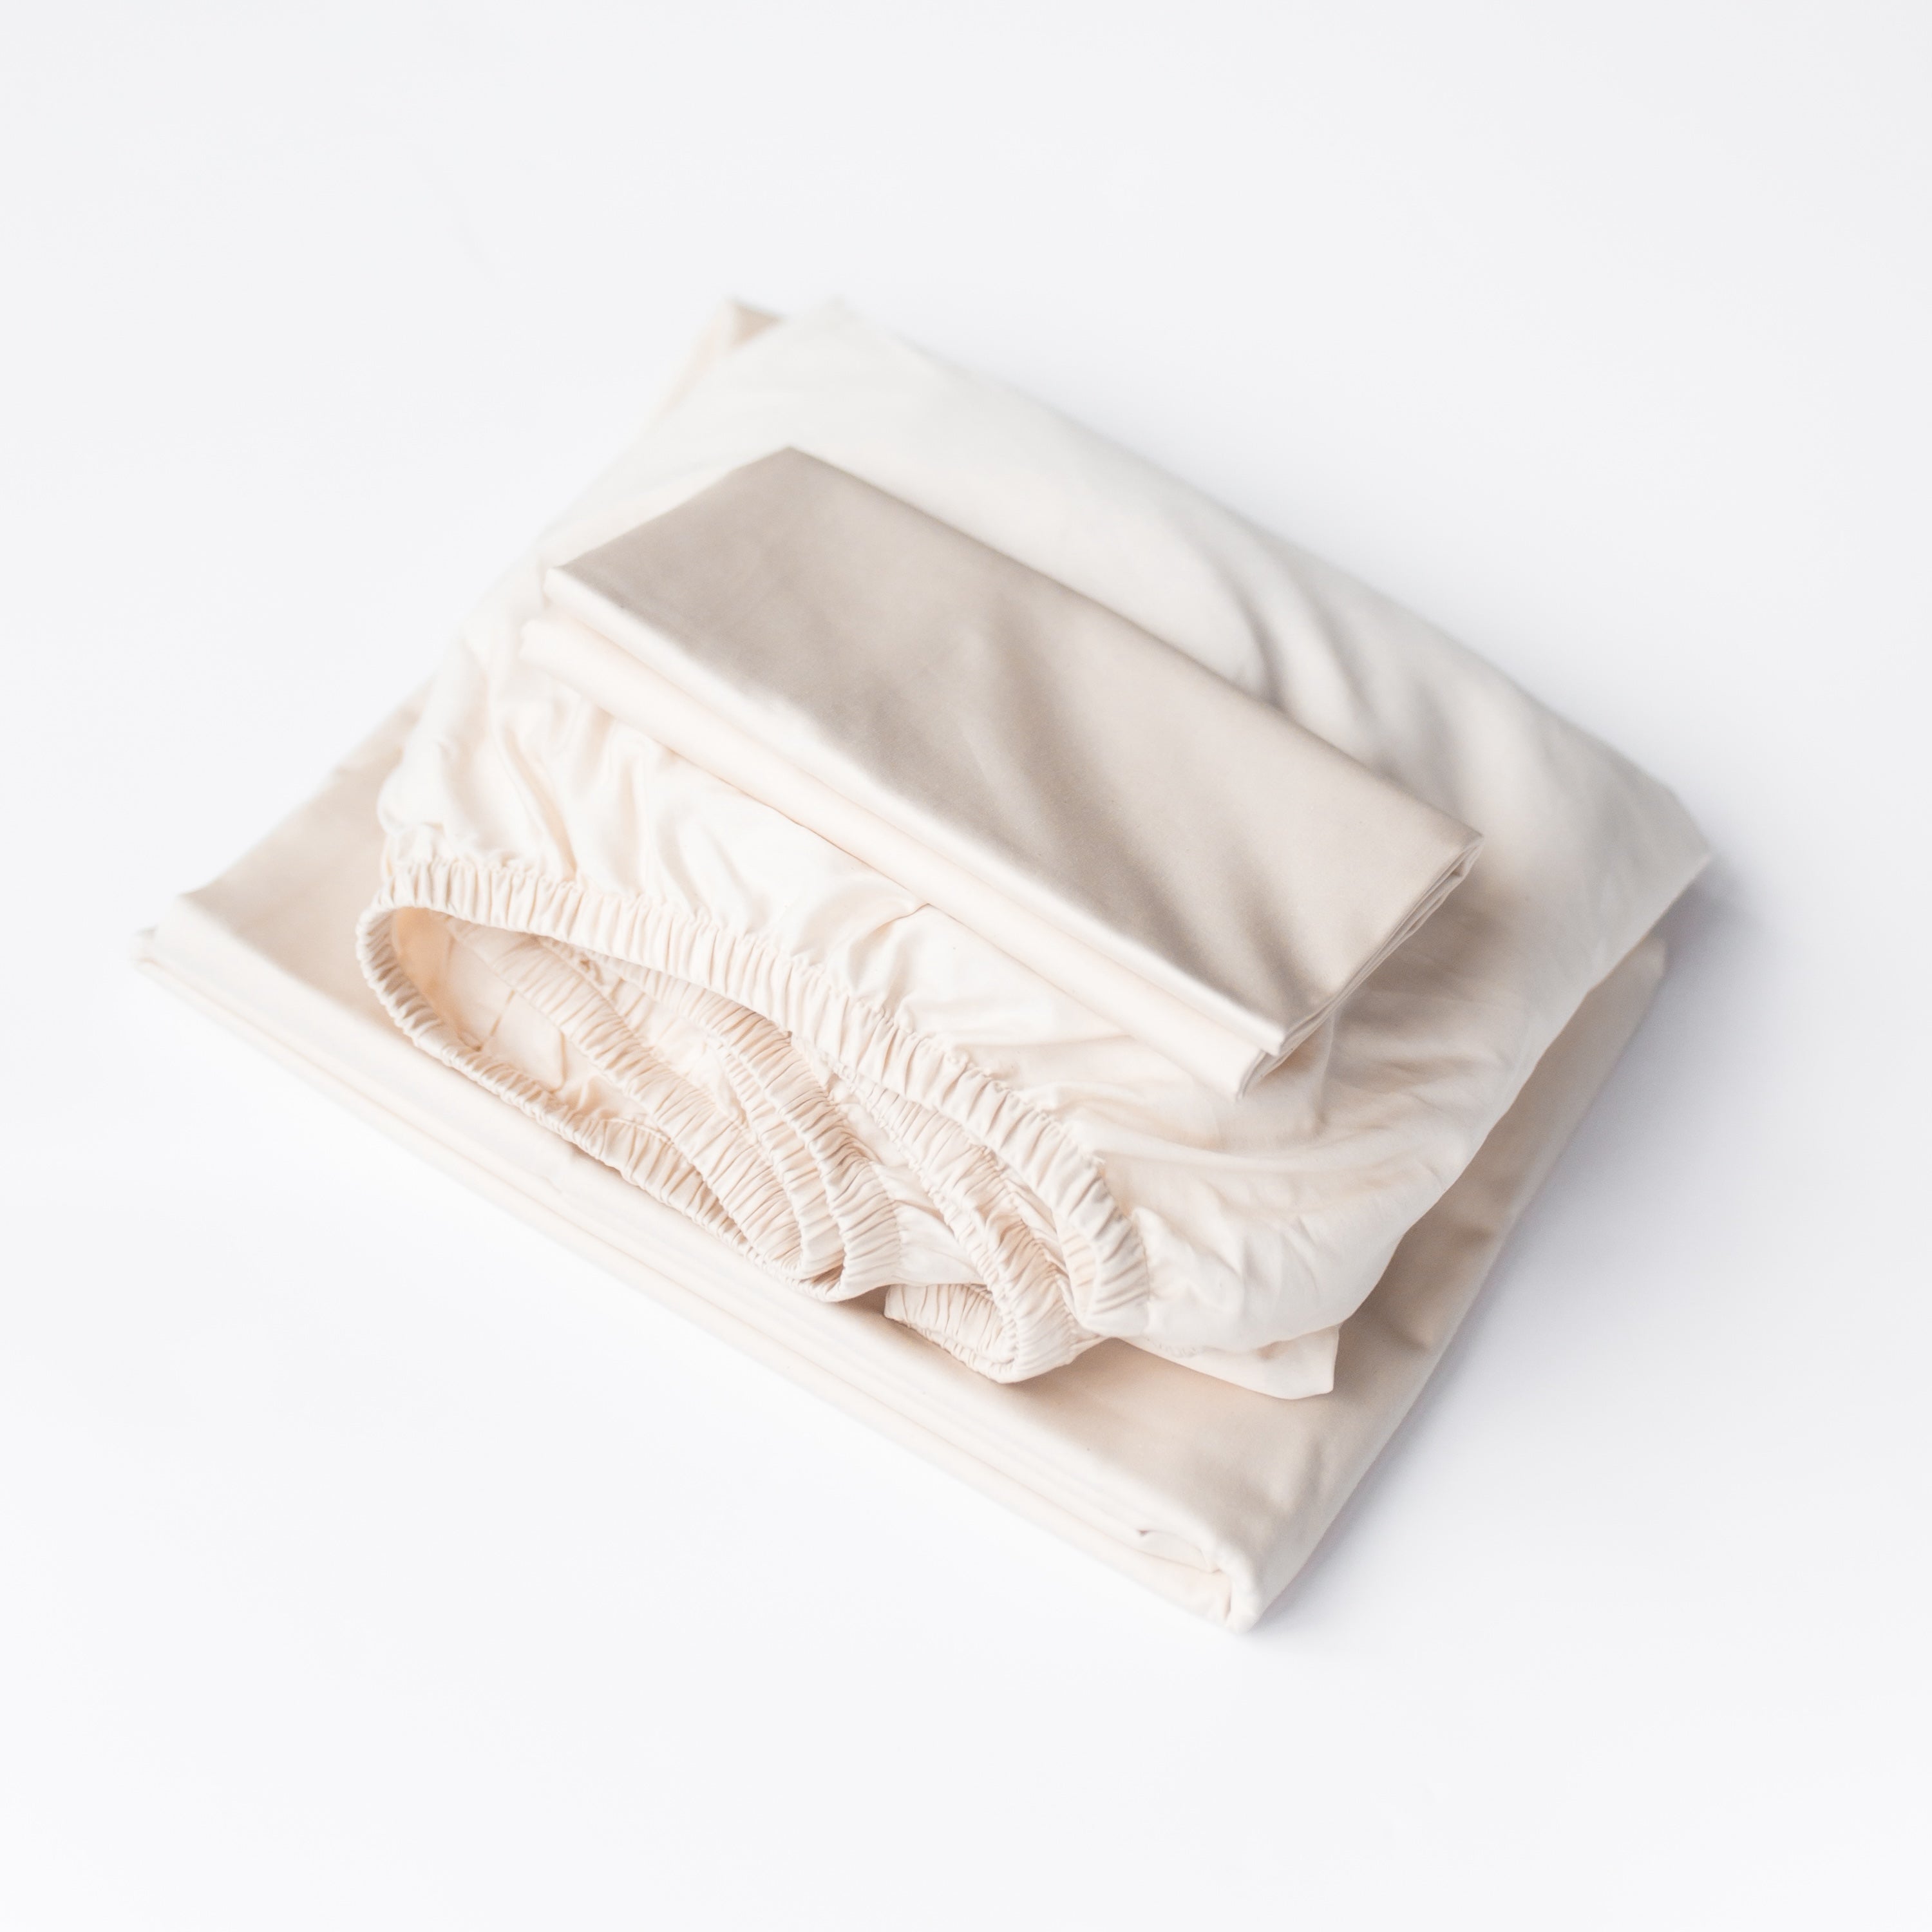 Oolie organic cotton pillowcases, flat sheet, and fitted sheet in natural, unbleached cotton, folded flat and stacked on a white background.